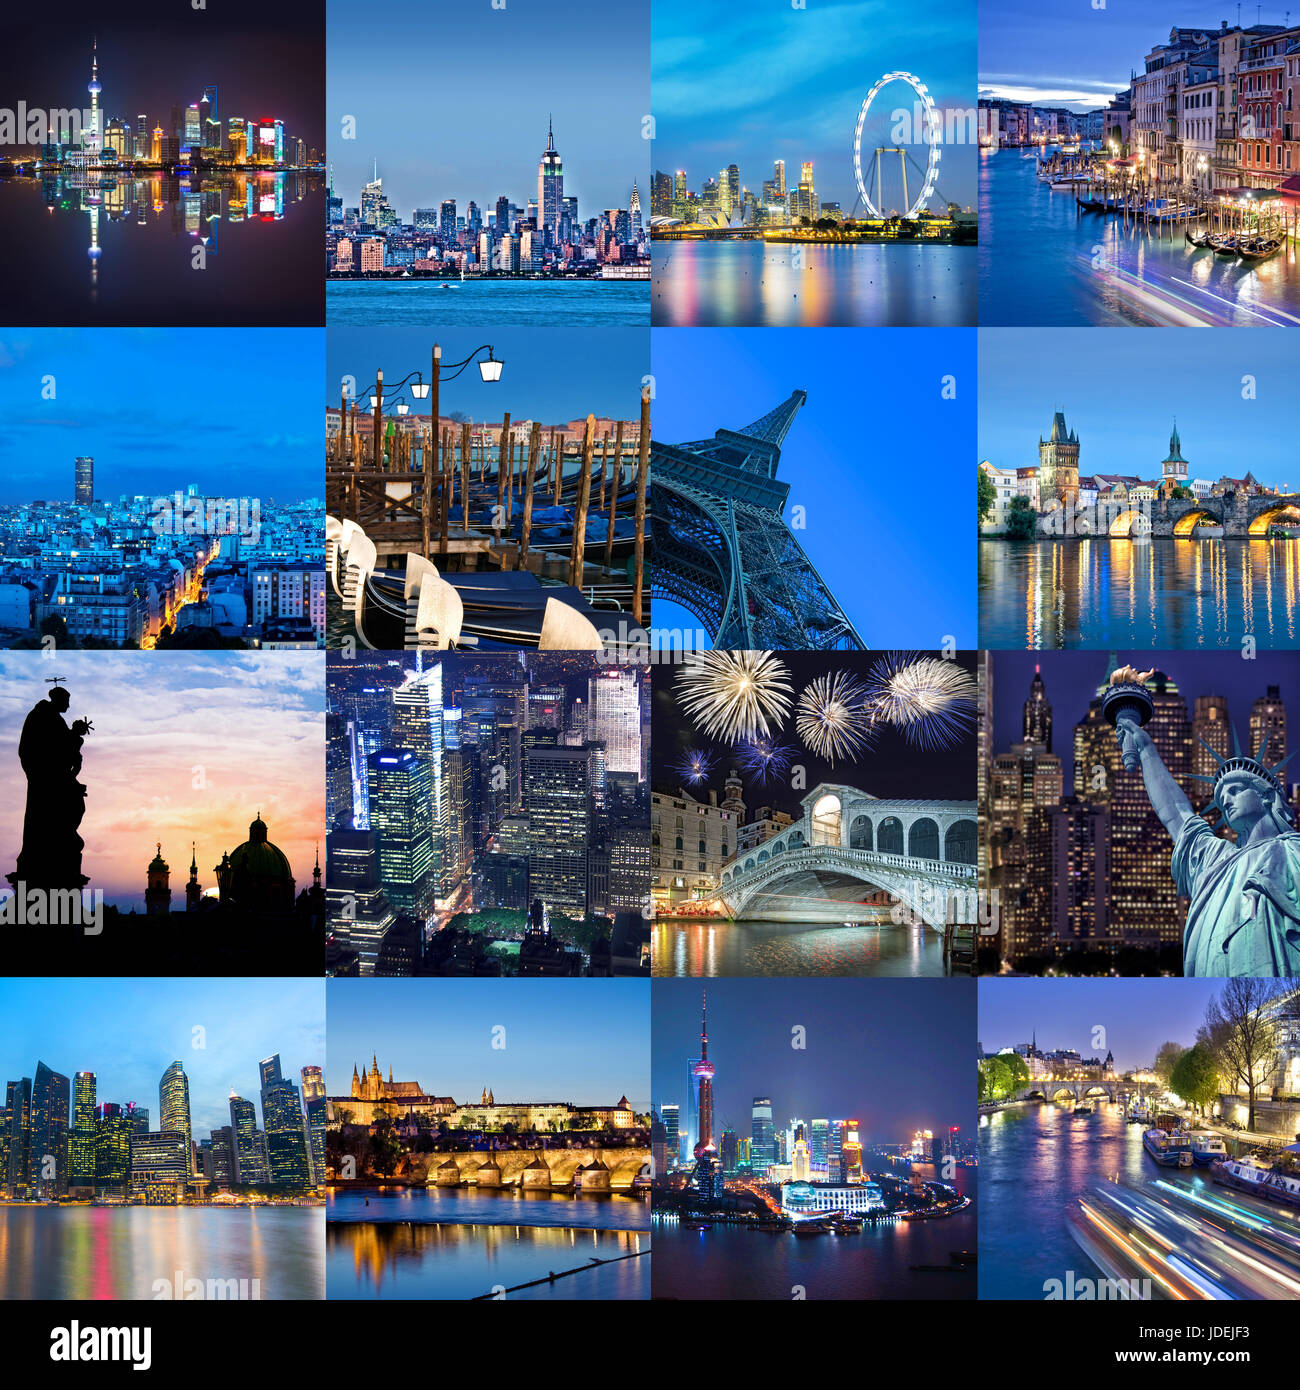 Cities of the word at night, square photo collage, travel and tourism concept Stock Photo